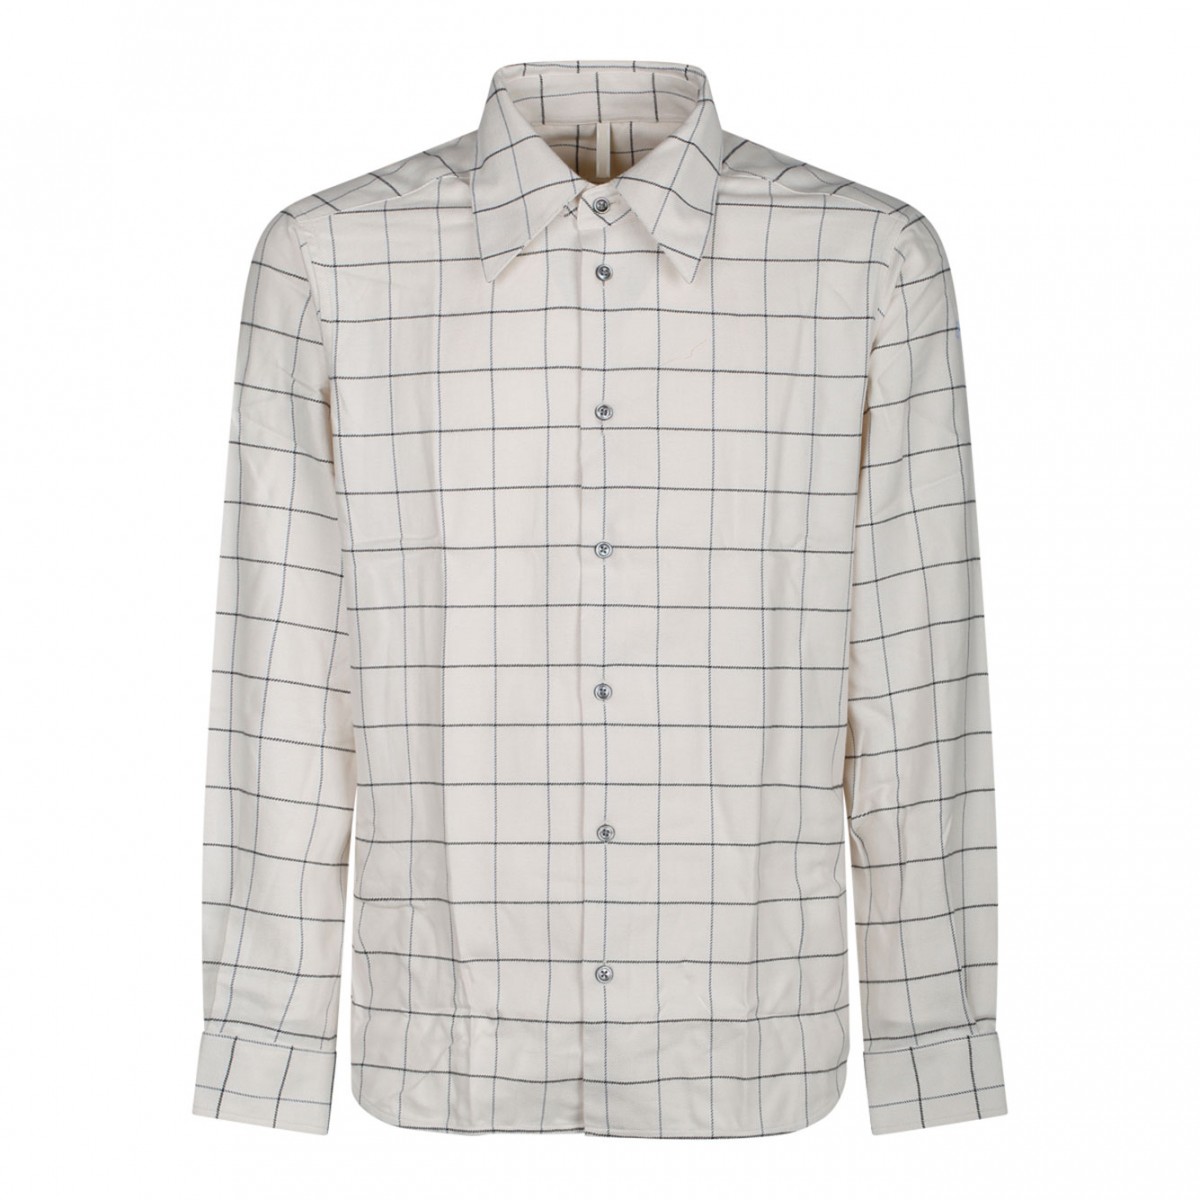 White and Grey Grid Pattern Shirt